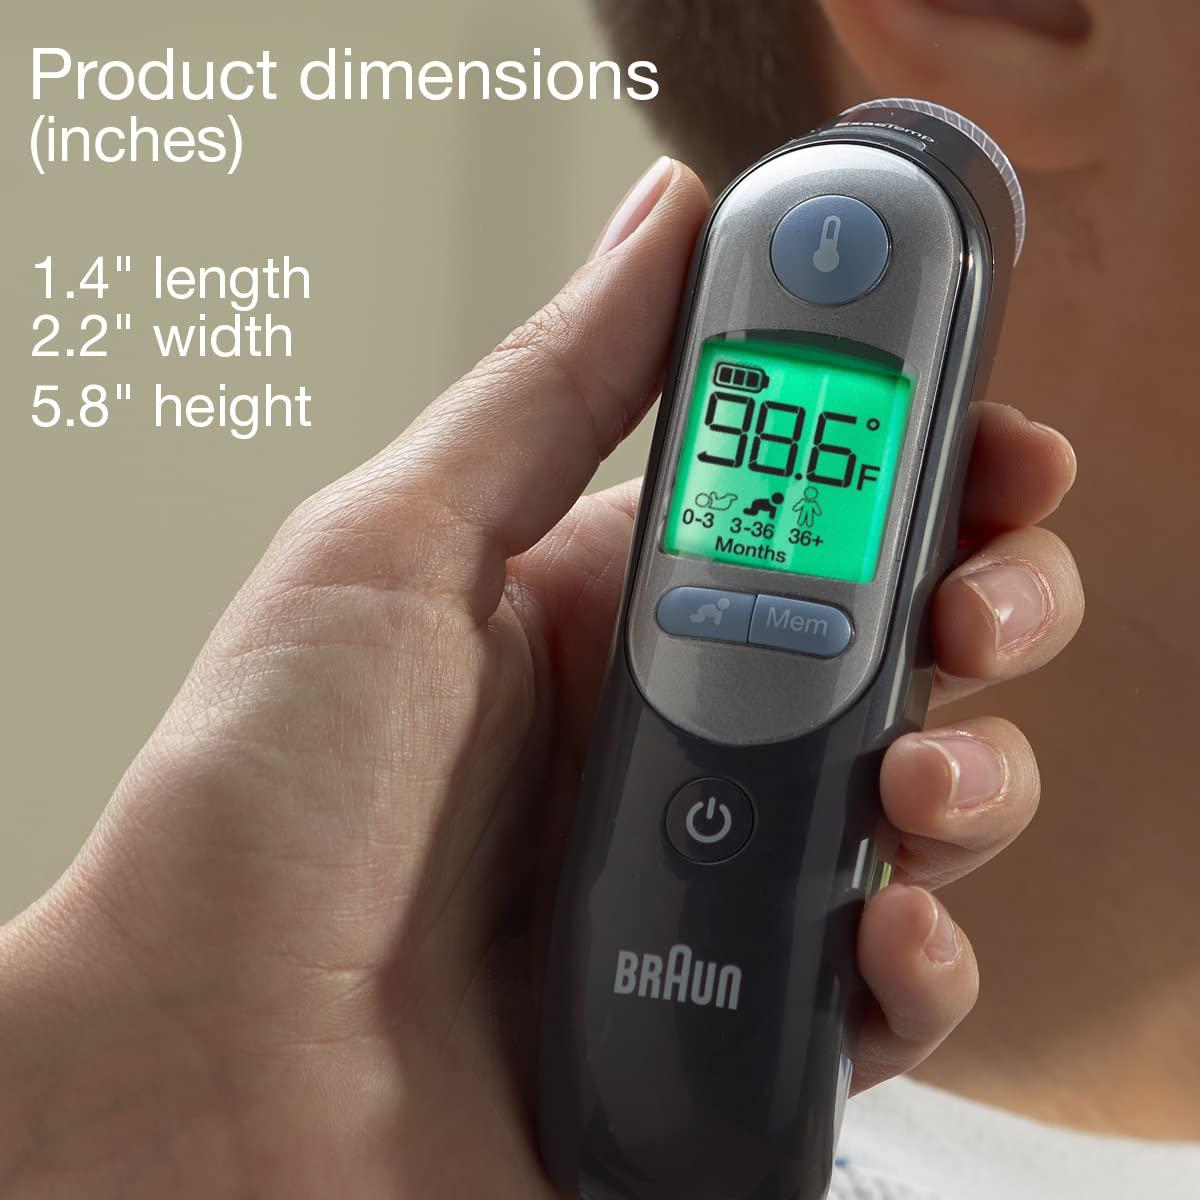 Braun ThermoScan 7 Ear Thermometer, IRT6520BUS, Black